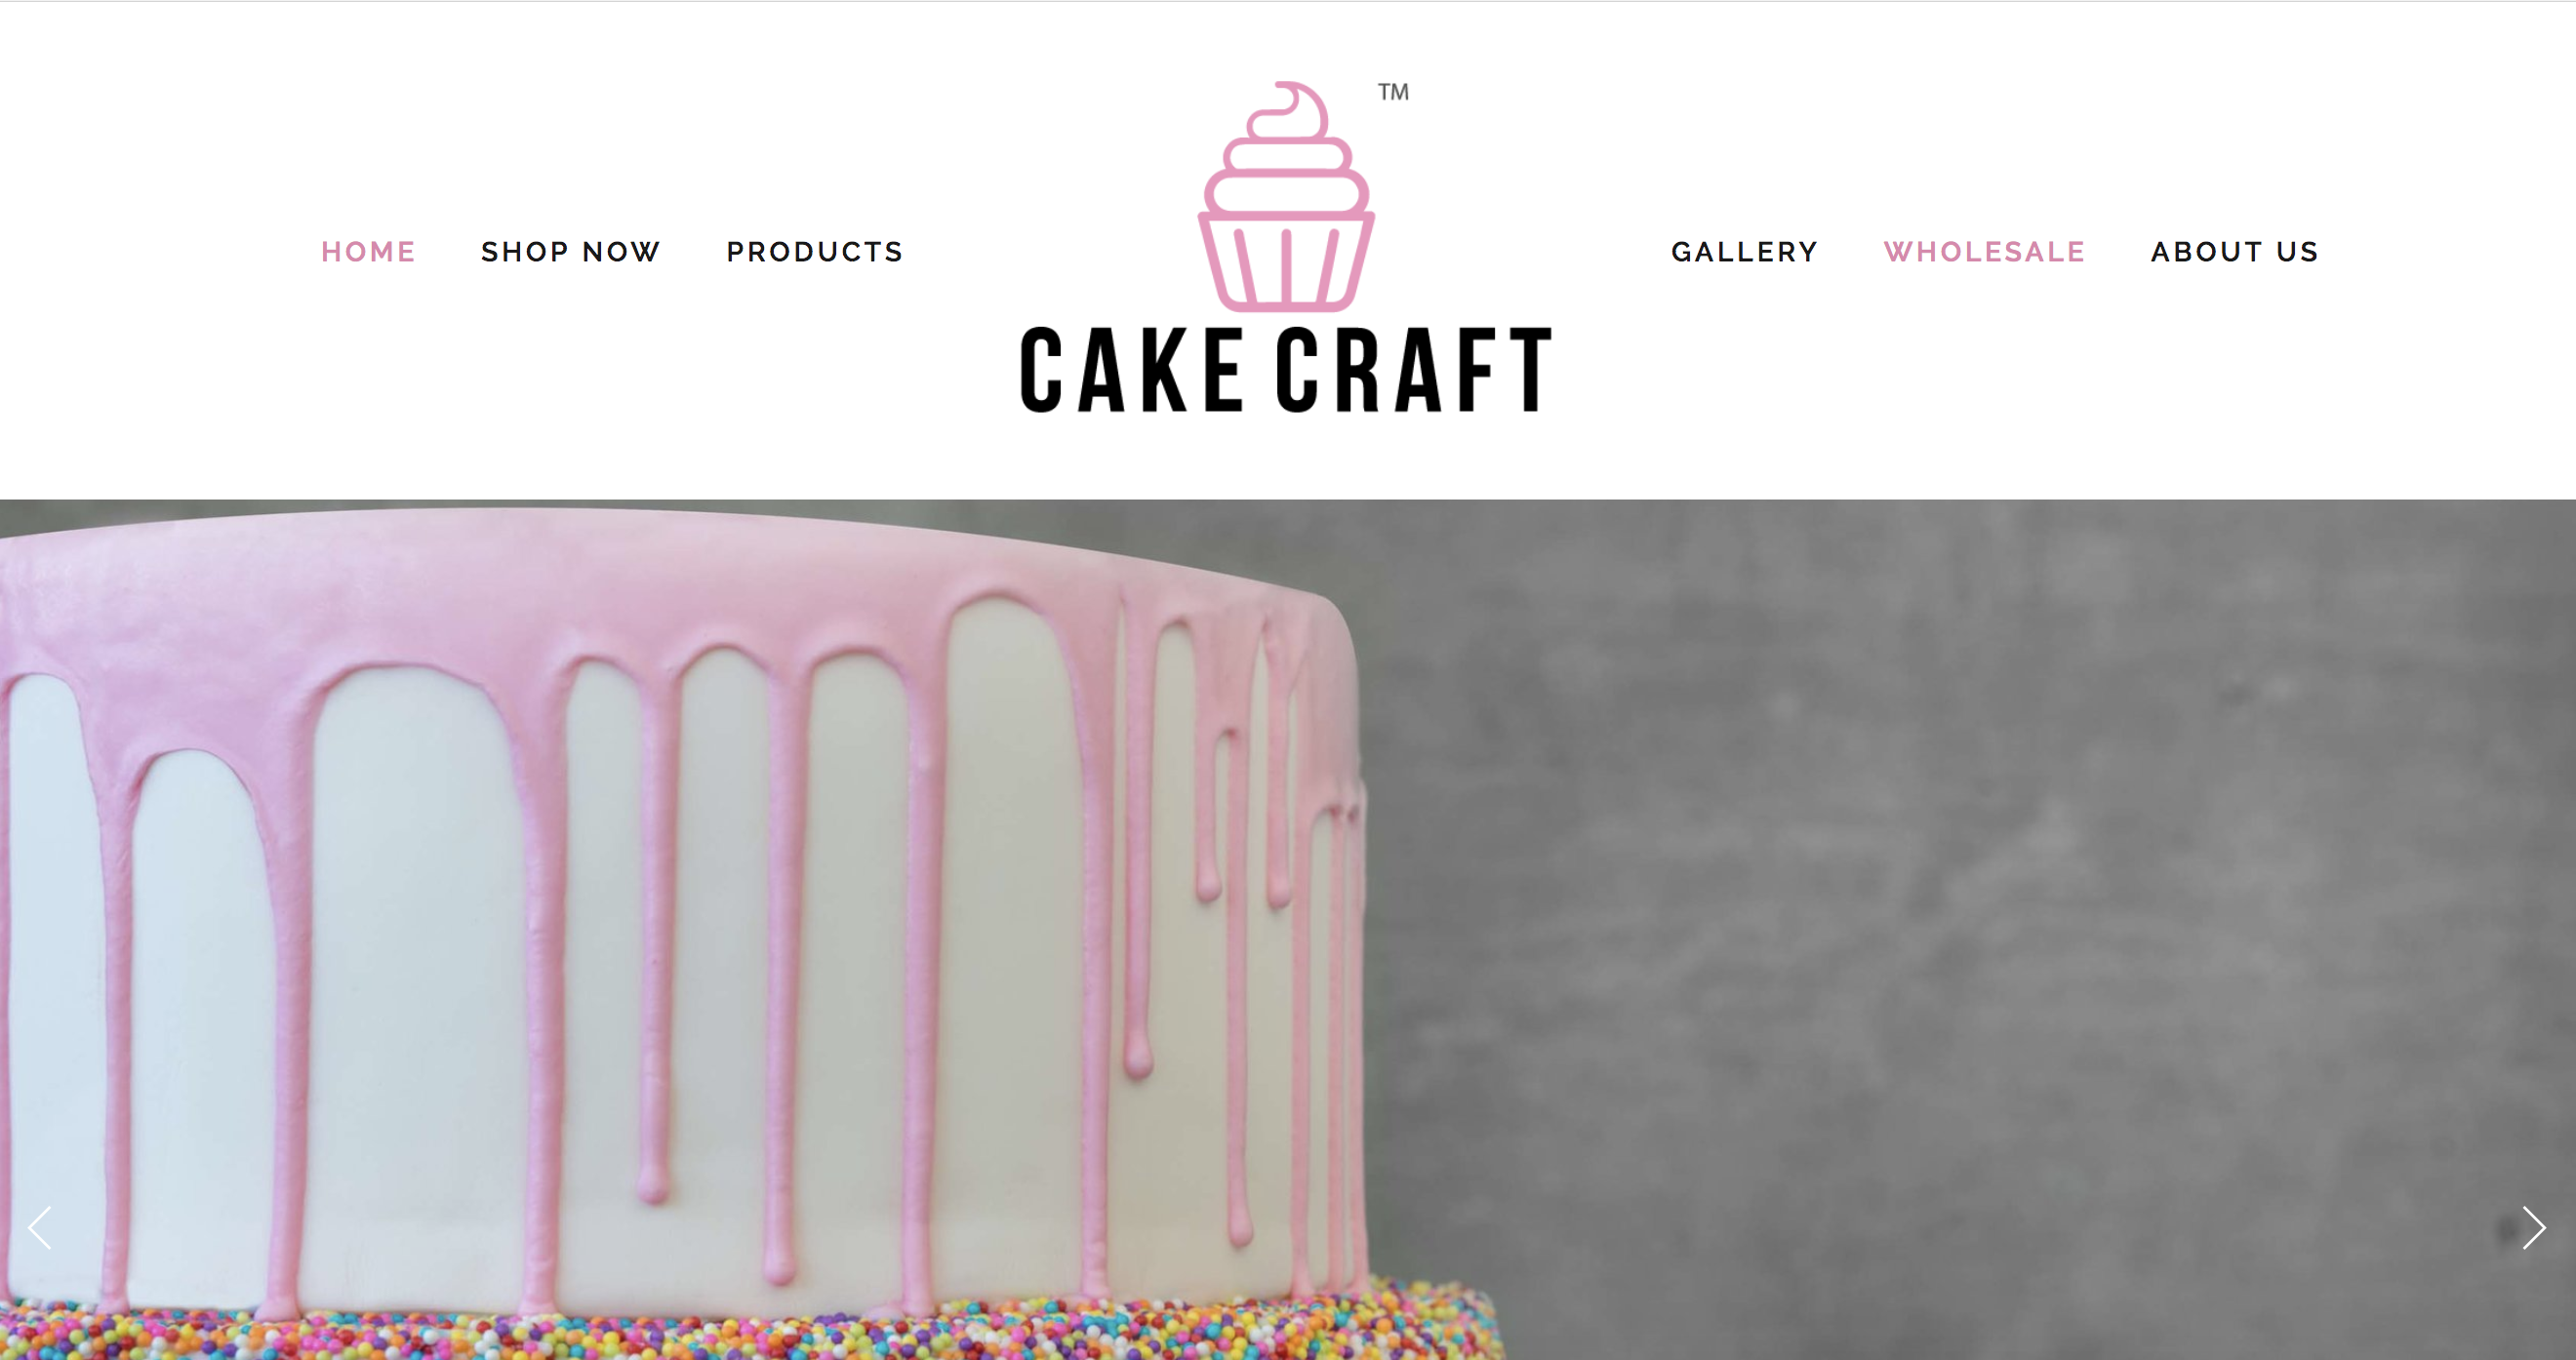 The Good Marketing Company has worked with Cake Craft so they could sell more on amazon